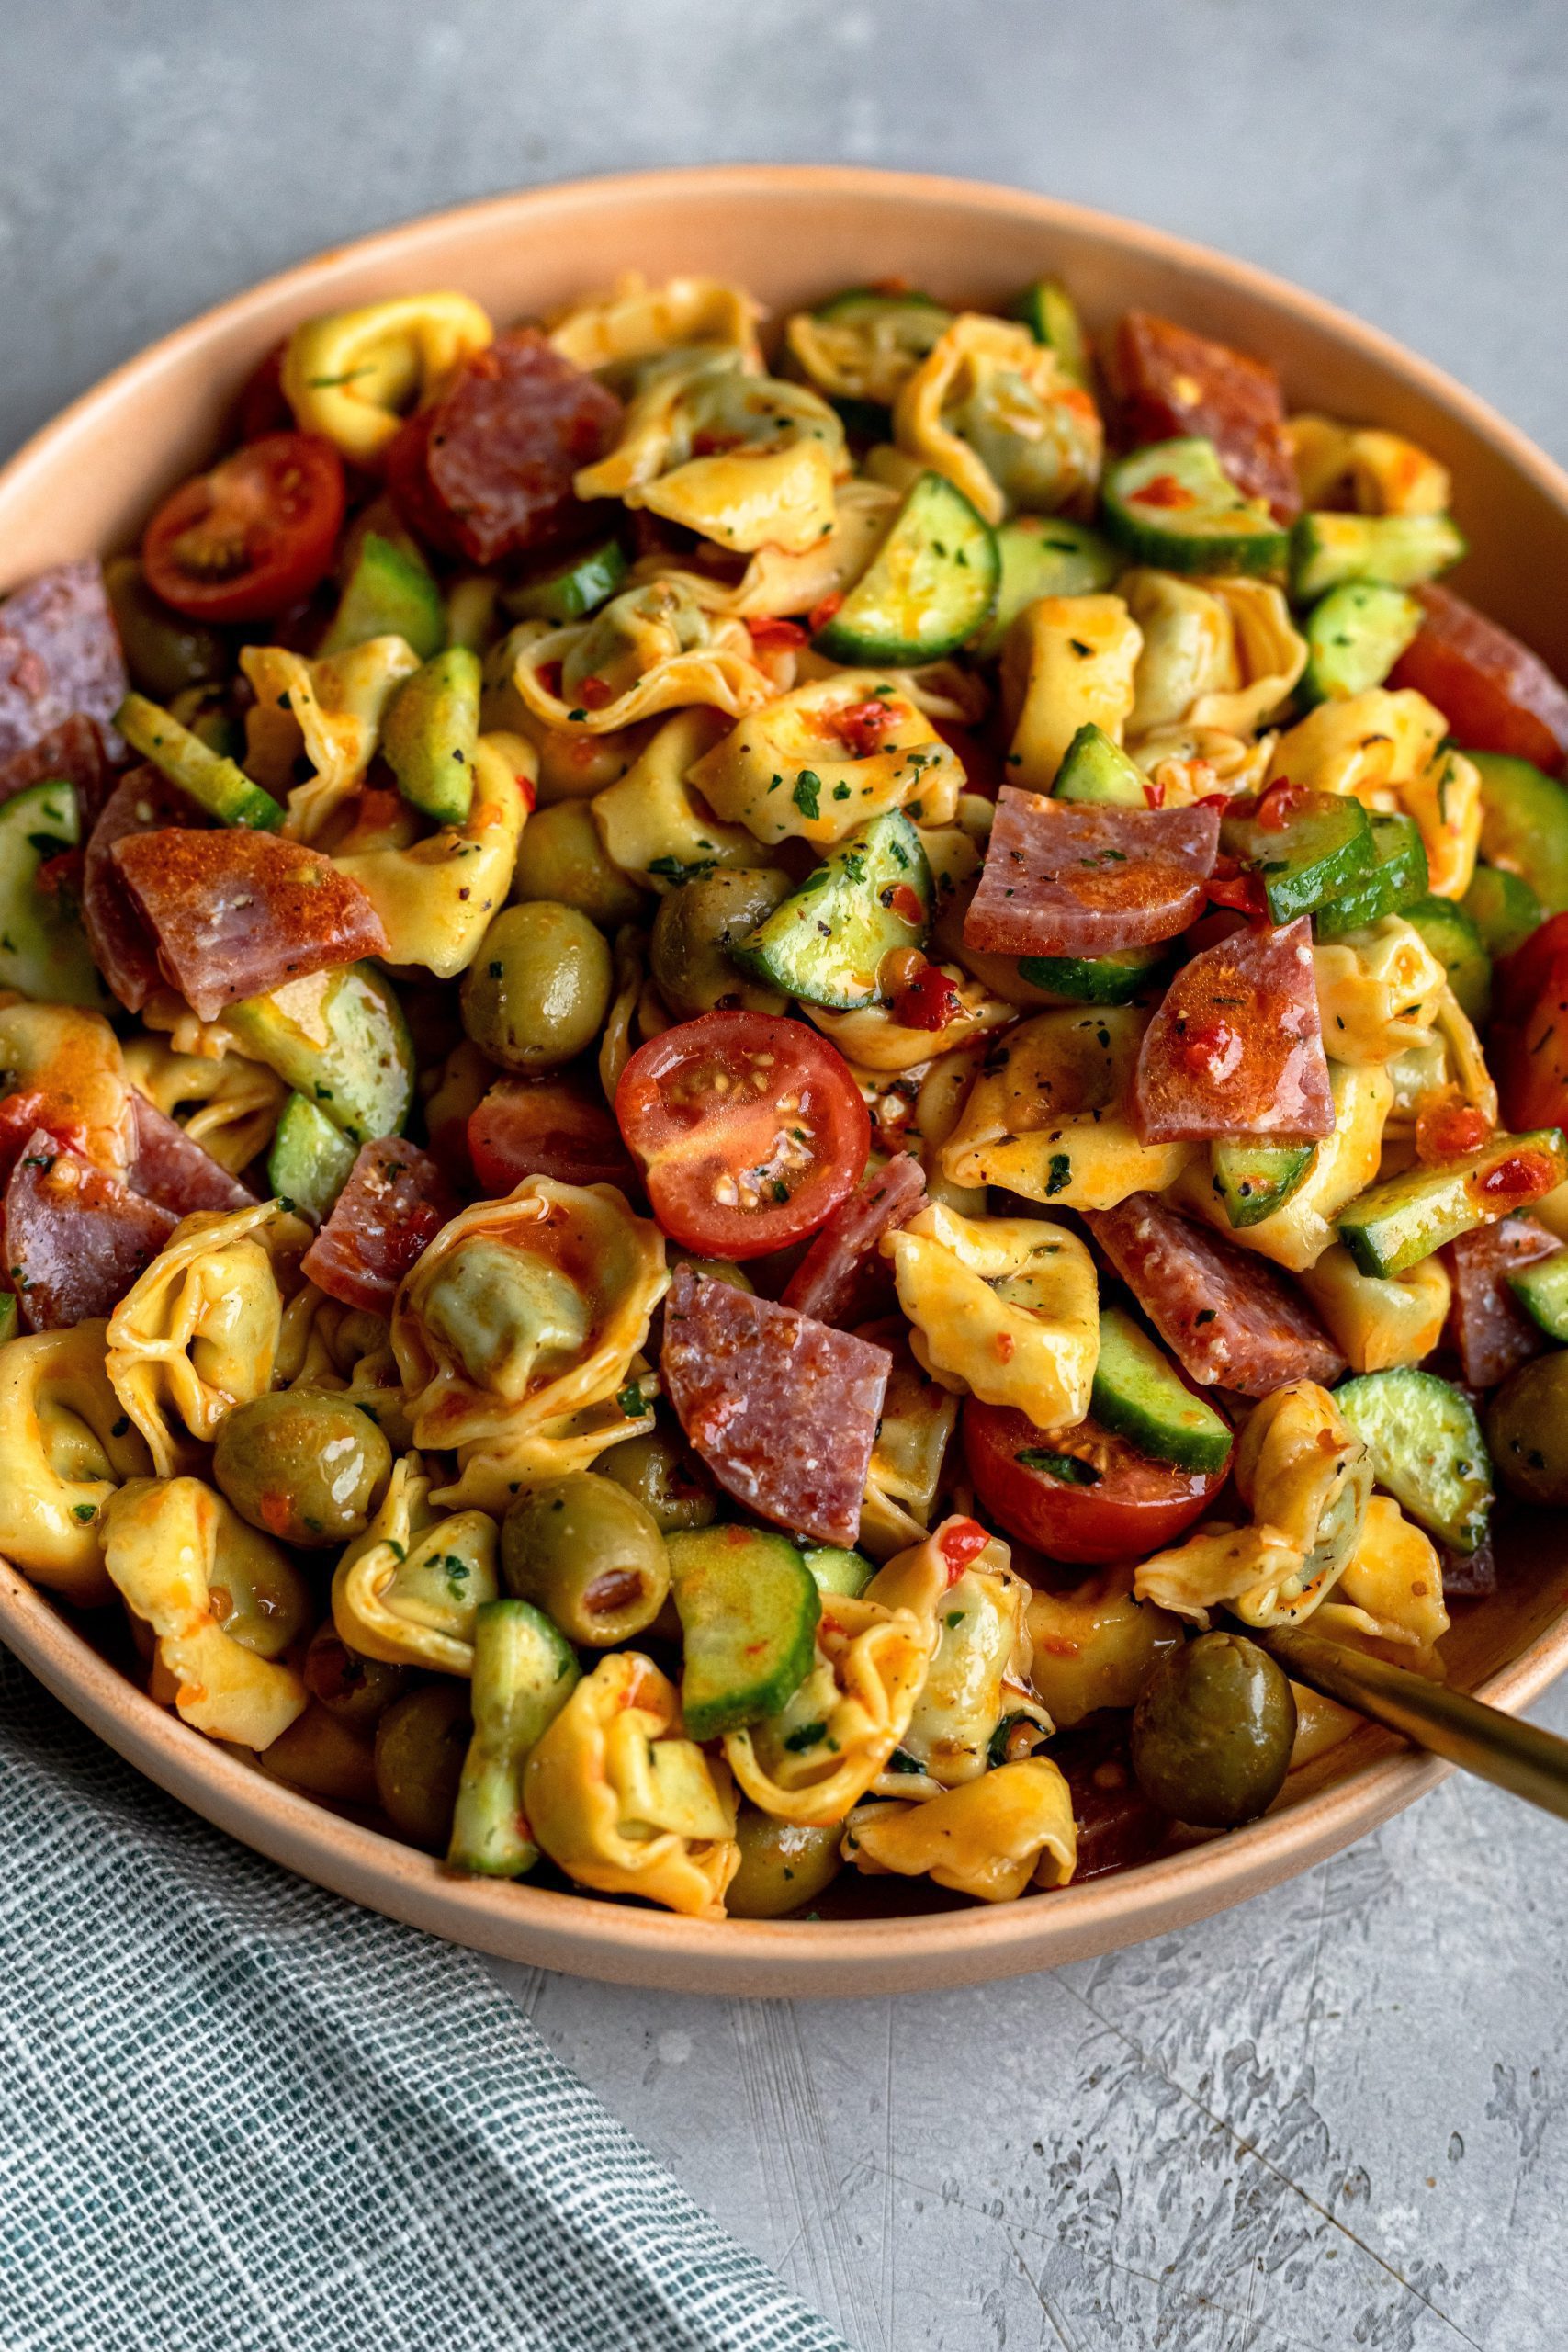 A heaping serving bowl of spicy tortellini salad with fresh vegetables, salami and pepperoni pieces. 